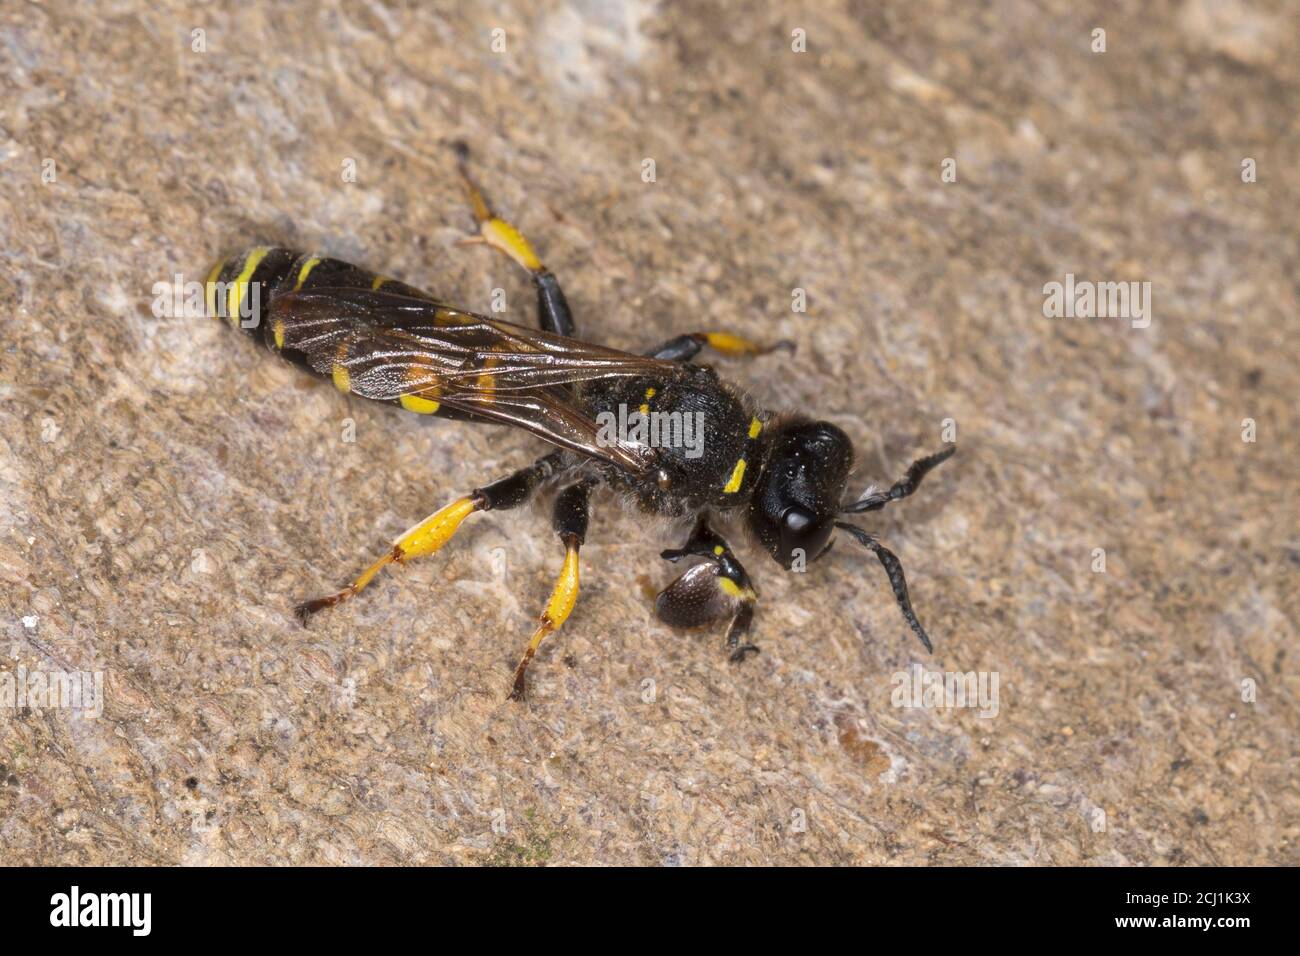 slender-bodied digger wasp (Crabro cribrarius), male, Germany Stock Photo